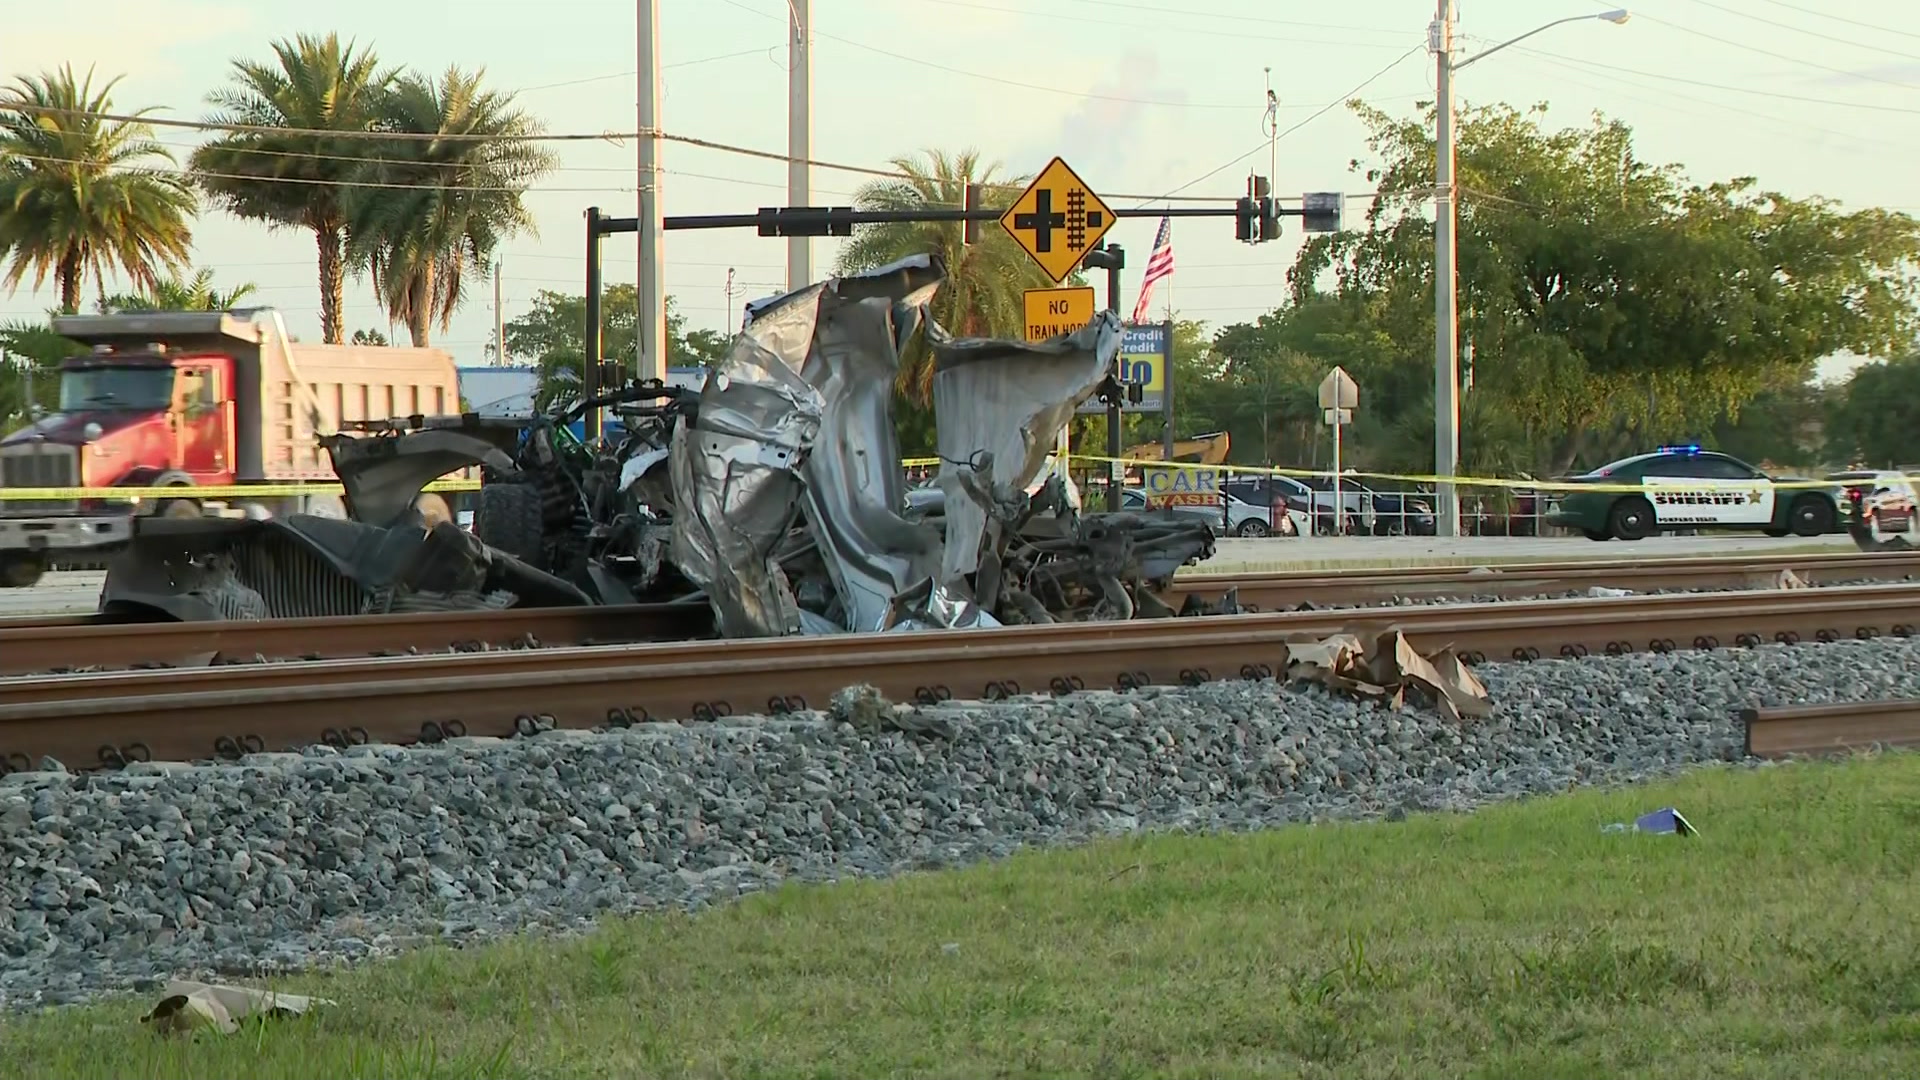 Sounds Of Brightline Train Whistling Down Tracks Gives Father Nightmares After Son Struck & Killed